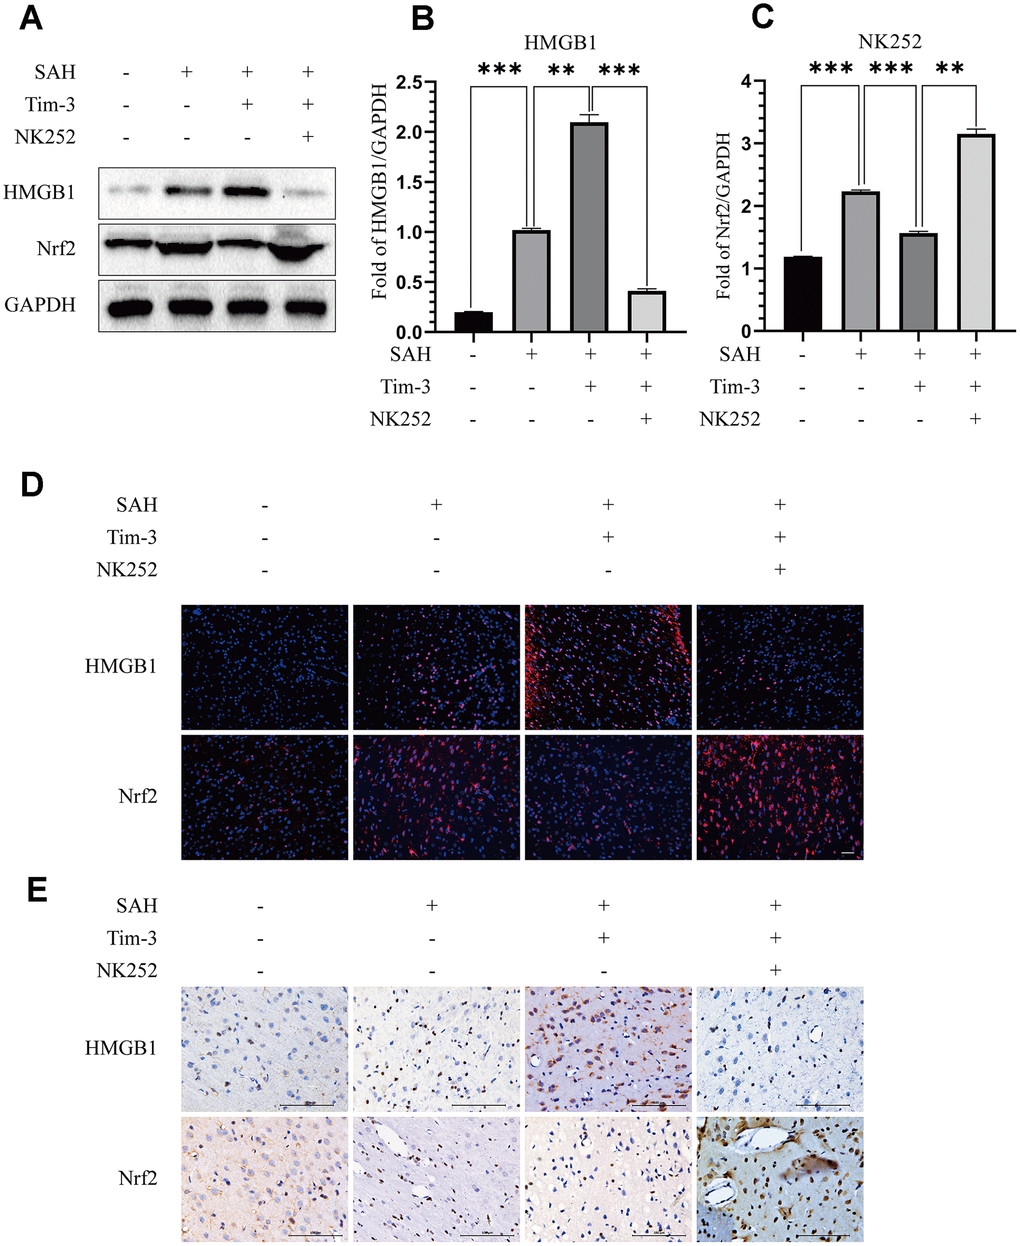 NK252 treatment reversed the effect of Tim-3 on the expression of HMGB1 and Nrf2. Compared with the SAH+AAV-Tim-3+DMSO groups, western blotting data indicated that NK252 significantly decreased the expression of HMGB1 and increased the expression of Nrf2 (A) as assessed by quantitative analysis of HMGB1 (B) and Nrf2 (C) in the left hemisphere at 24 h post-SAH(n = 6 in each group). Data are expressed as the mean ± SEM.**p D). Scale bar = 50 μm. Immunohistochemical staining of HMGB1 and Nrf2 (E) in the left cerebral cortex at 24 h post-SAH. Scale bar = 100 μm.